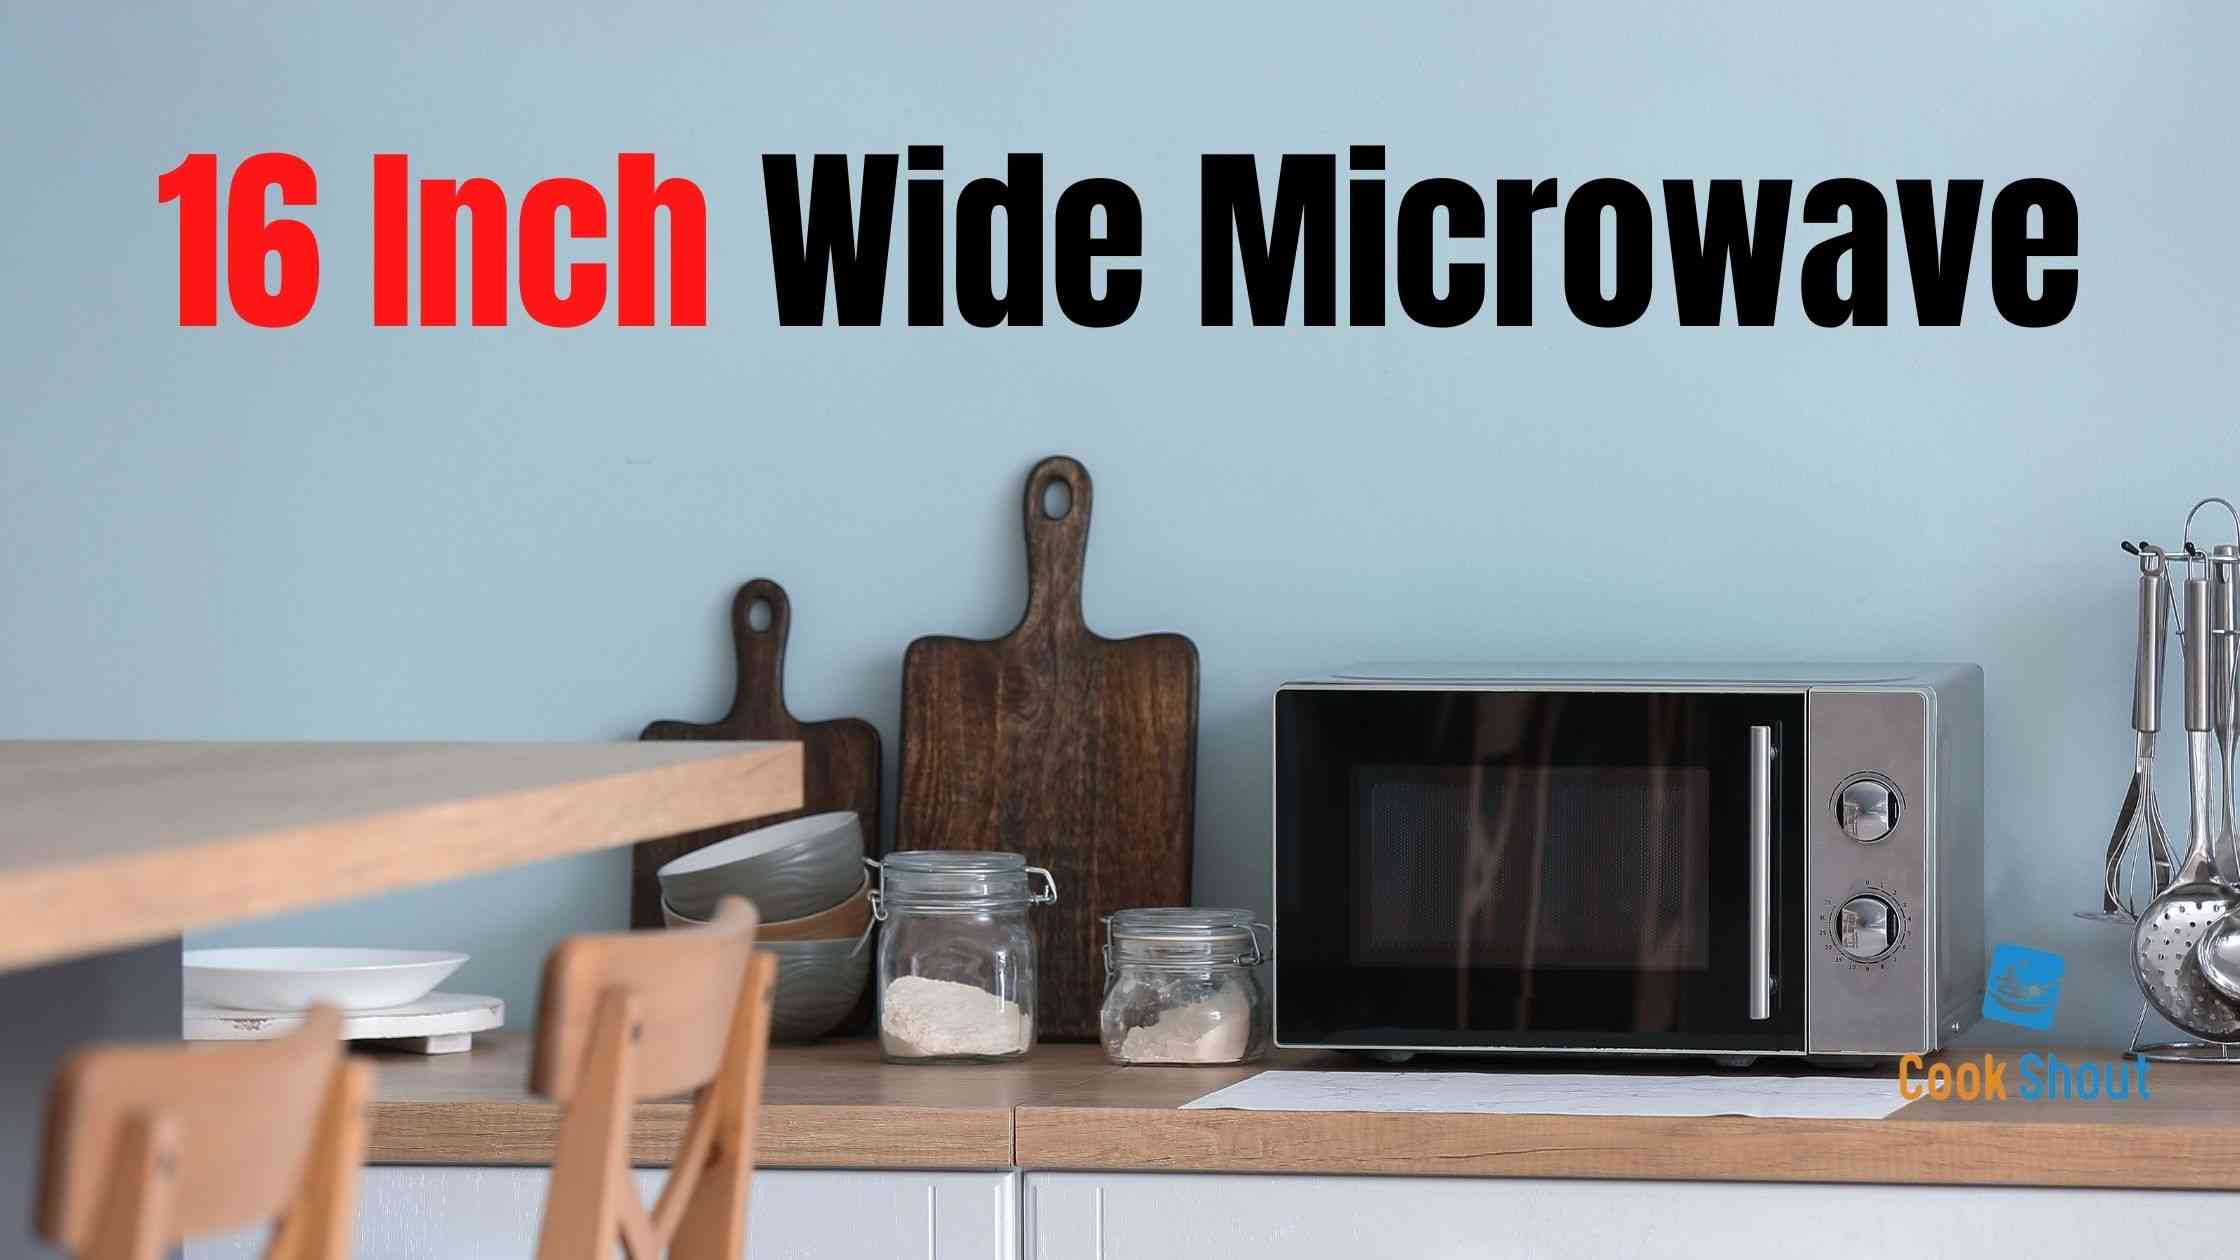 16 inch wide microwave